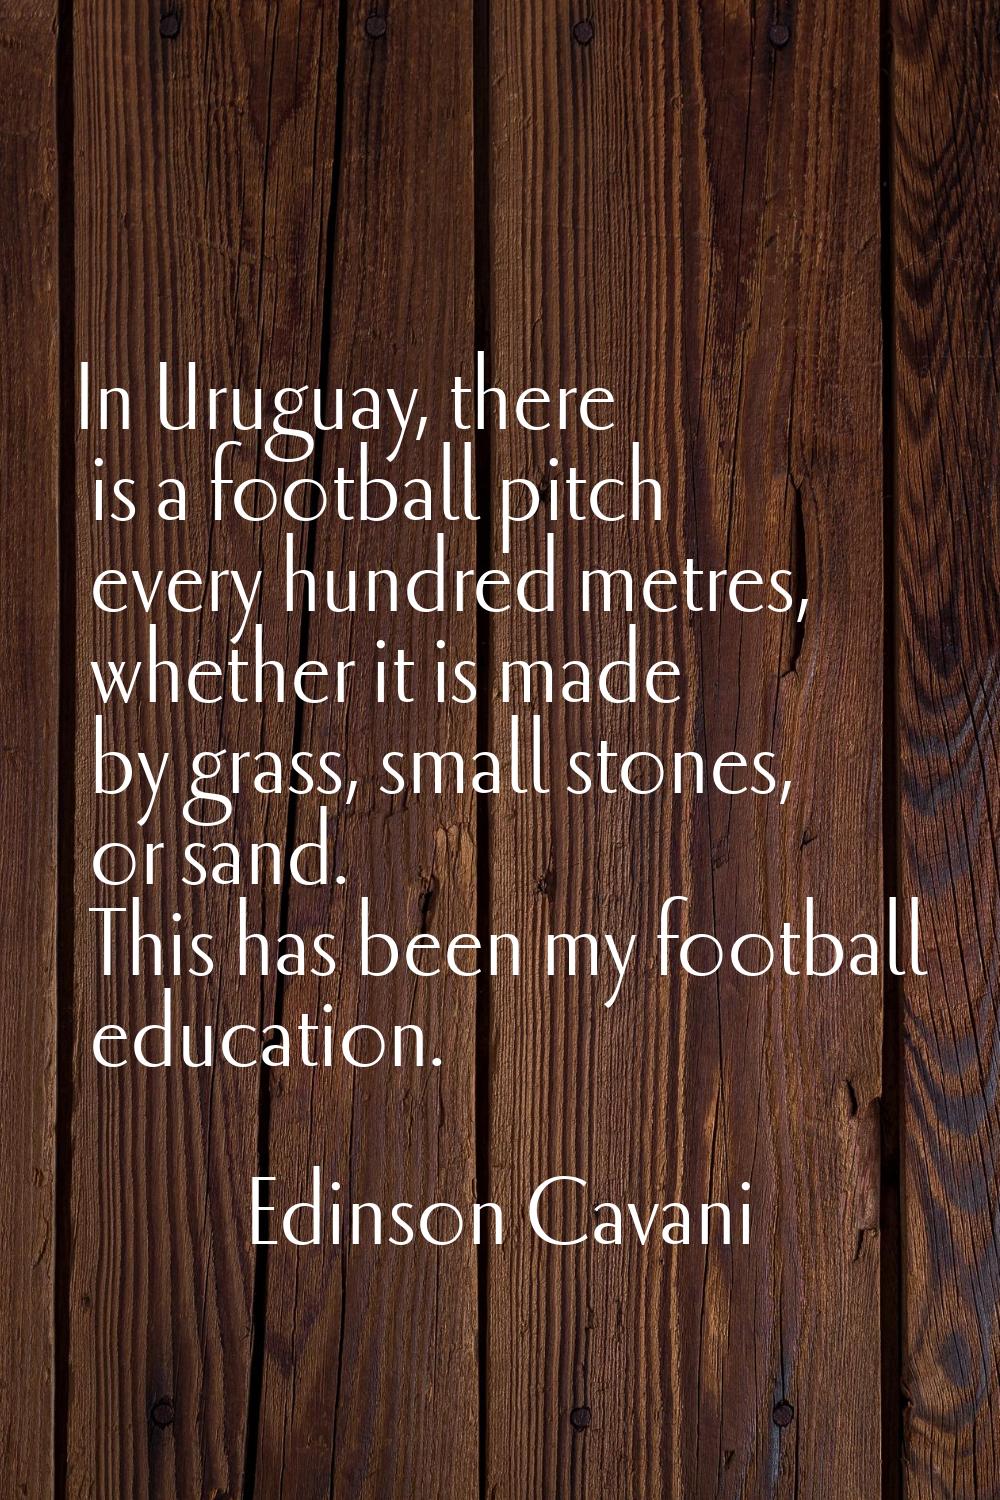 In Uruguay, there is a football pitch every hundred metres, whether it is made by grass, small ston